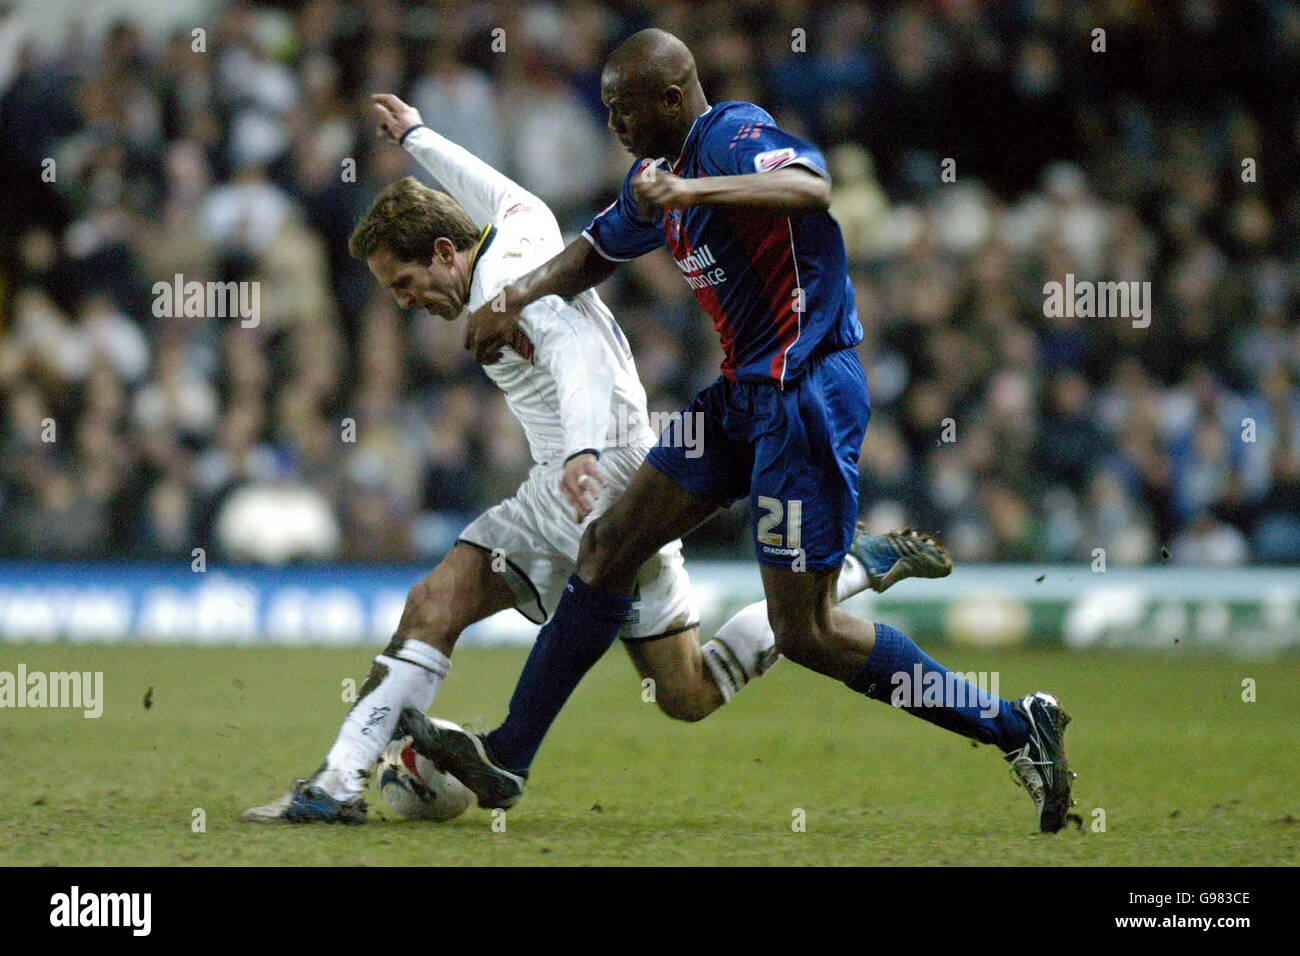 Leeds United's Eddie Lewis (L) and Crystal Palace's Emmerson Boyce tussle for the ball during the Coca-Cola Championship match at Elland Road, Leeds, Tuesday March 21, 2006. PRESS ASSOCIATION Photo. Photo credit should read: Alistair Wilson/PA. . Stock Photo